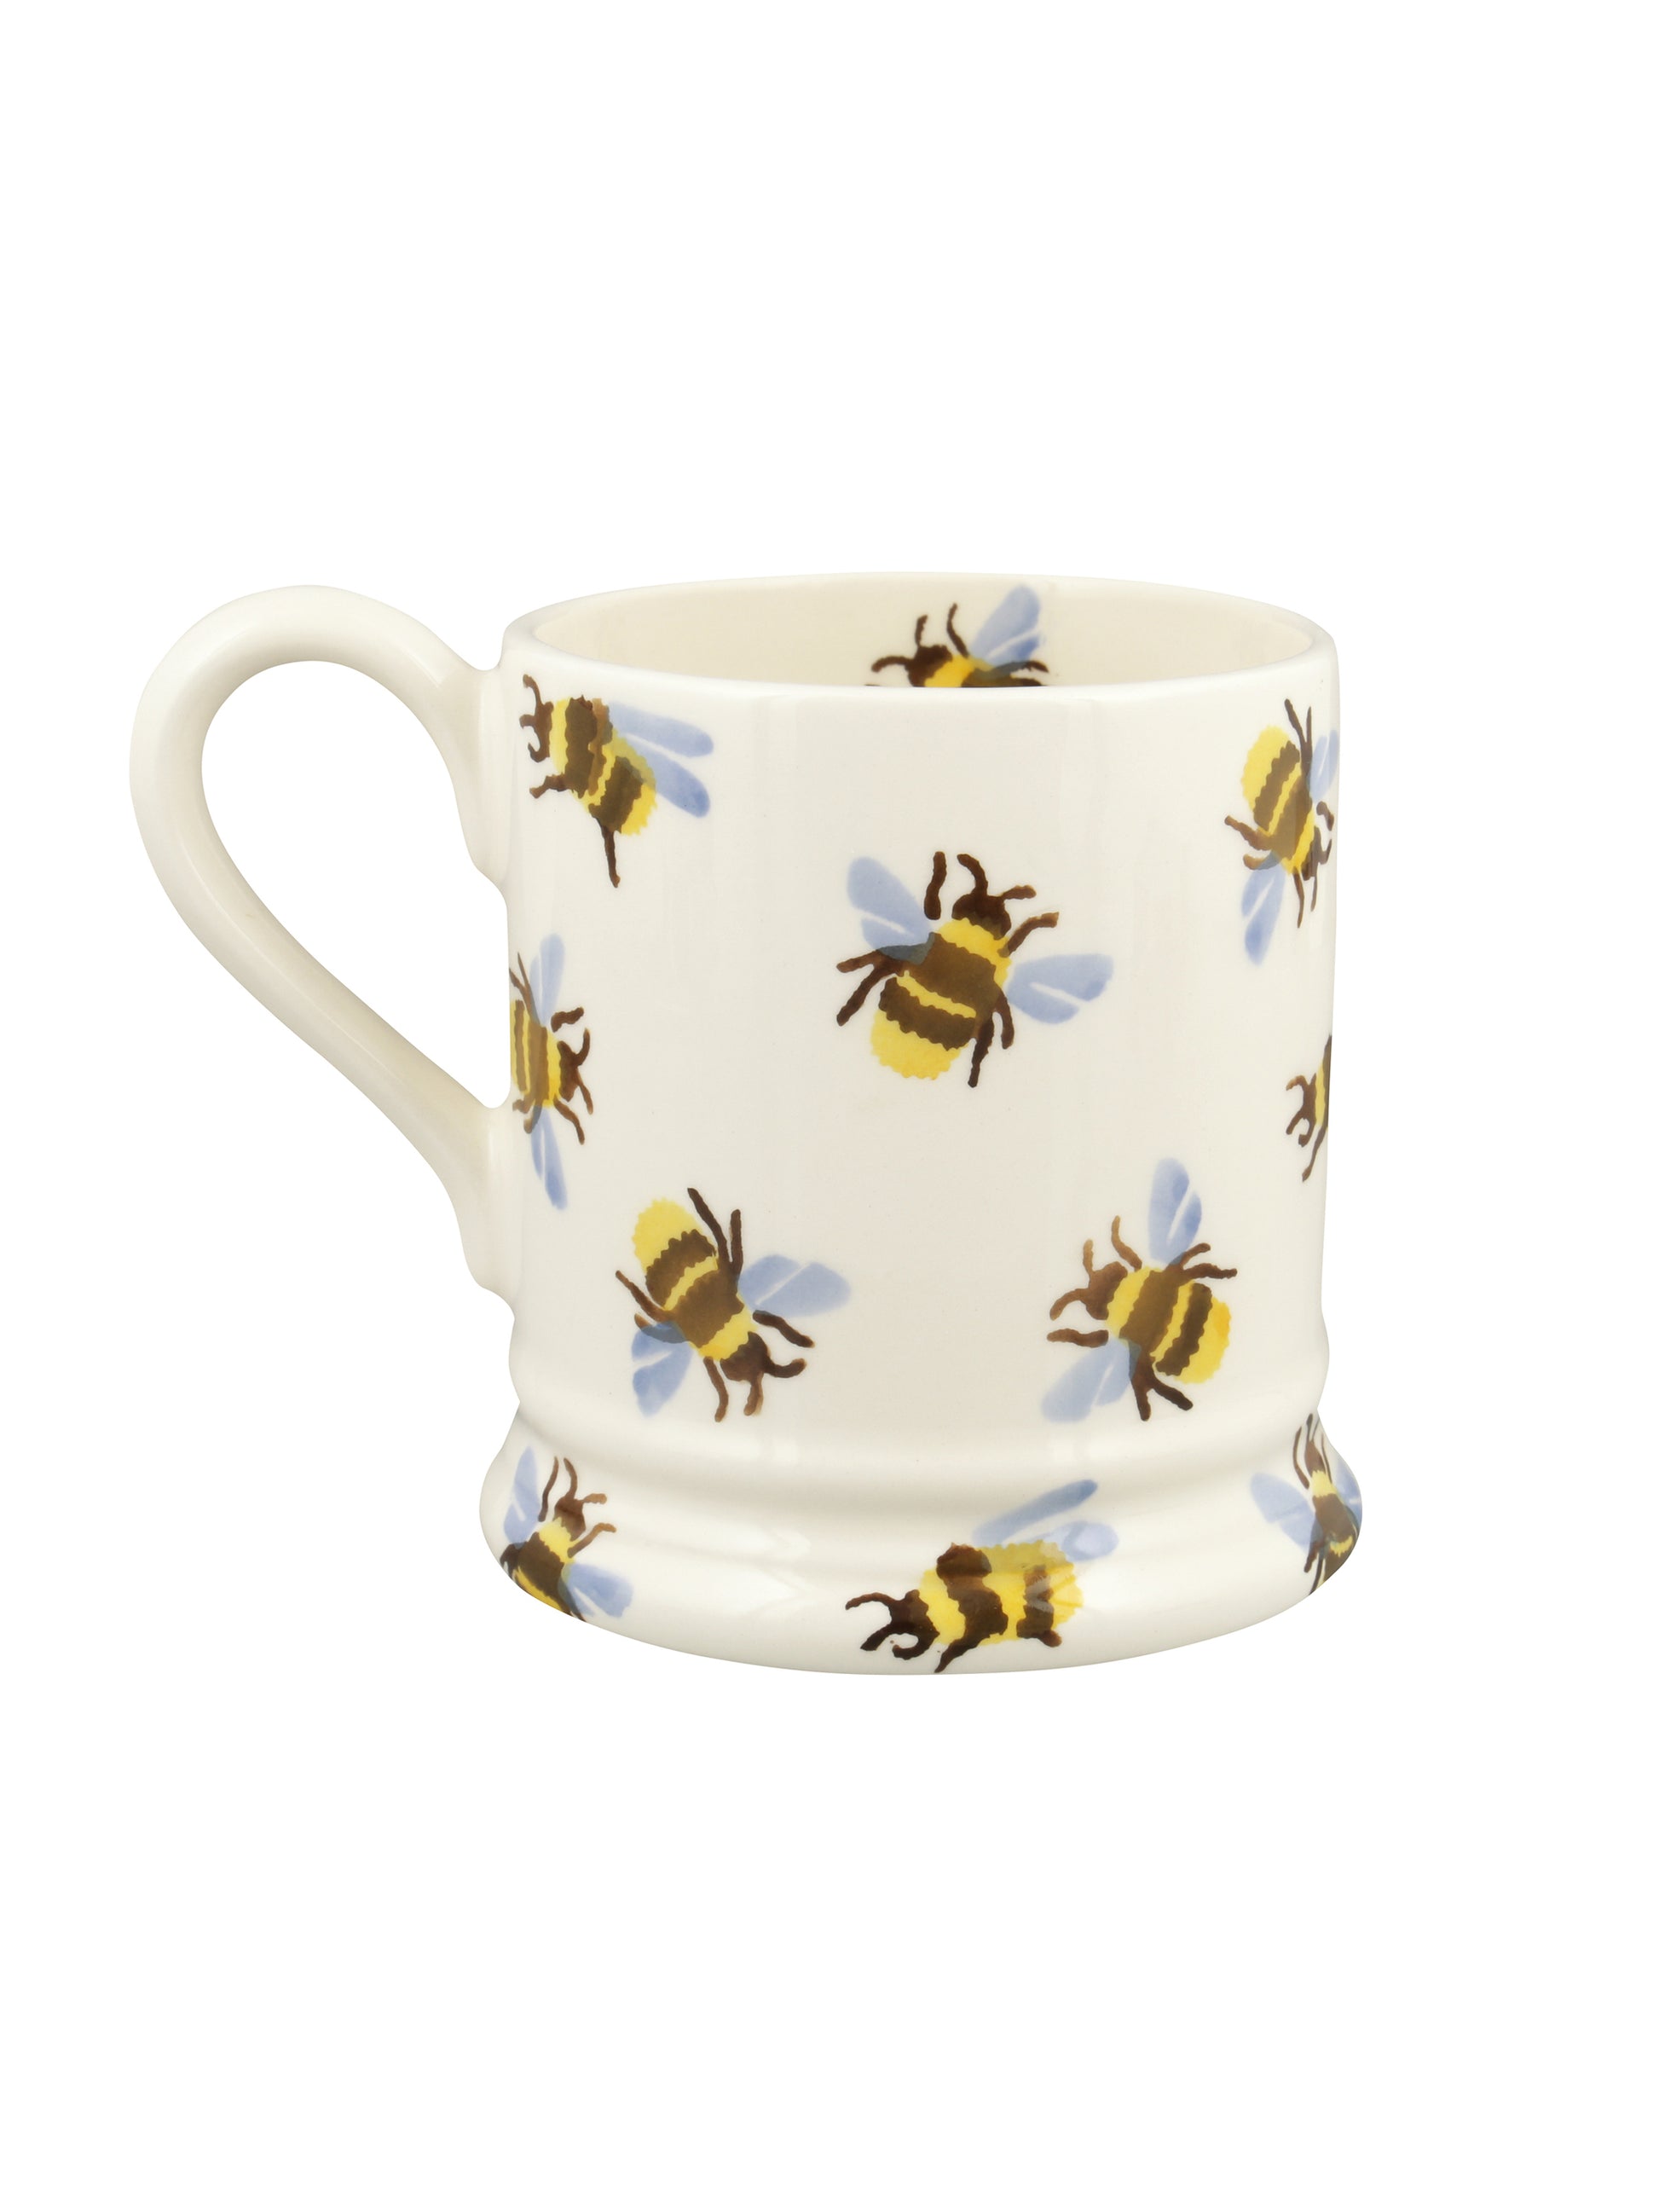 Bumble Bee Gifts & Antiques